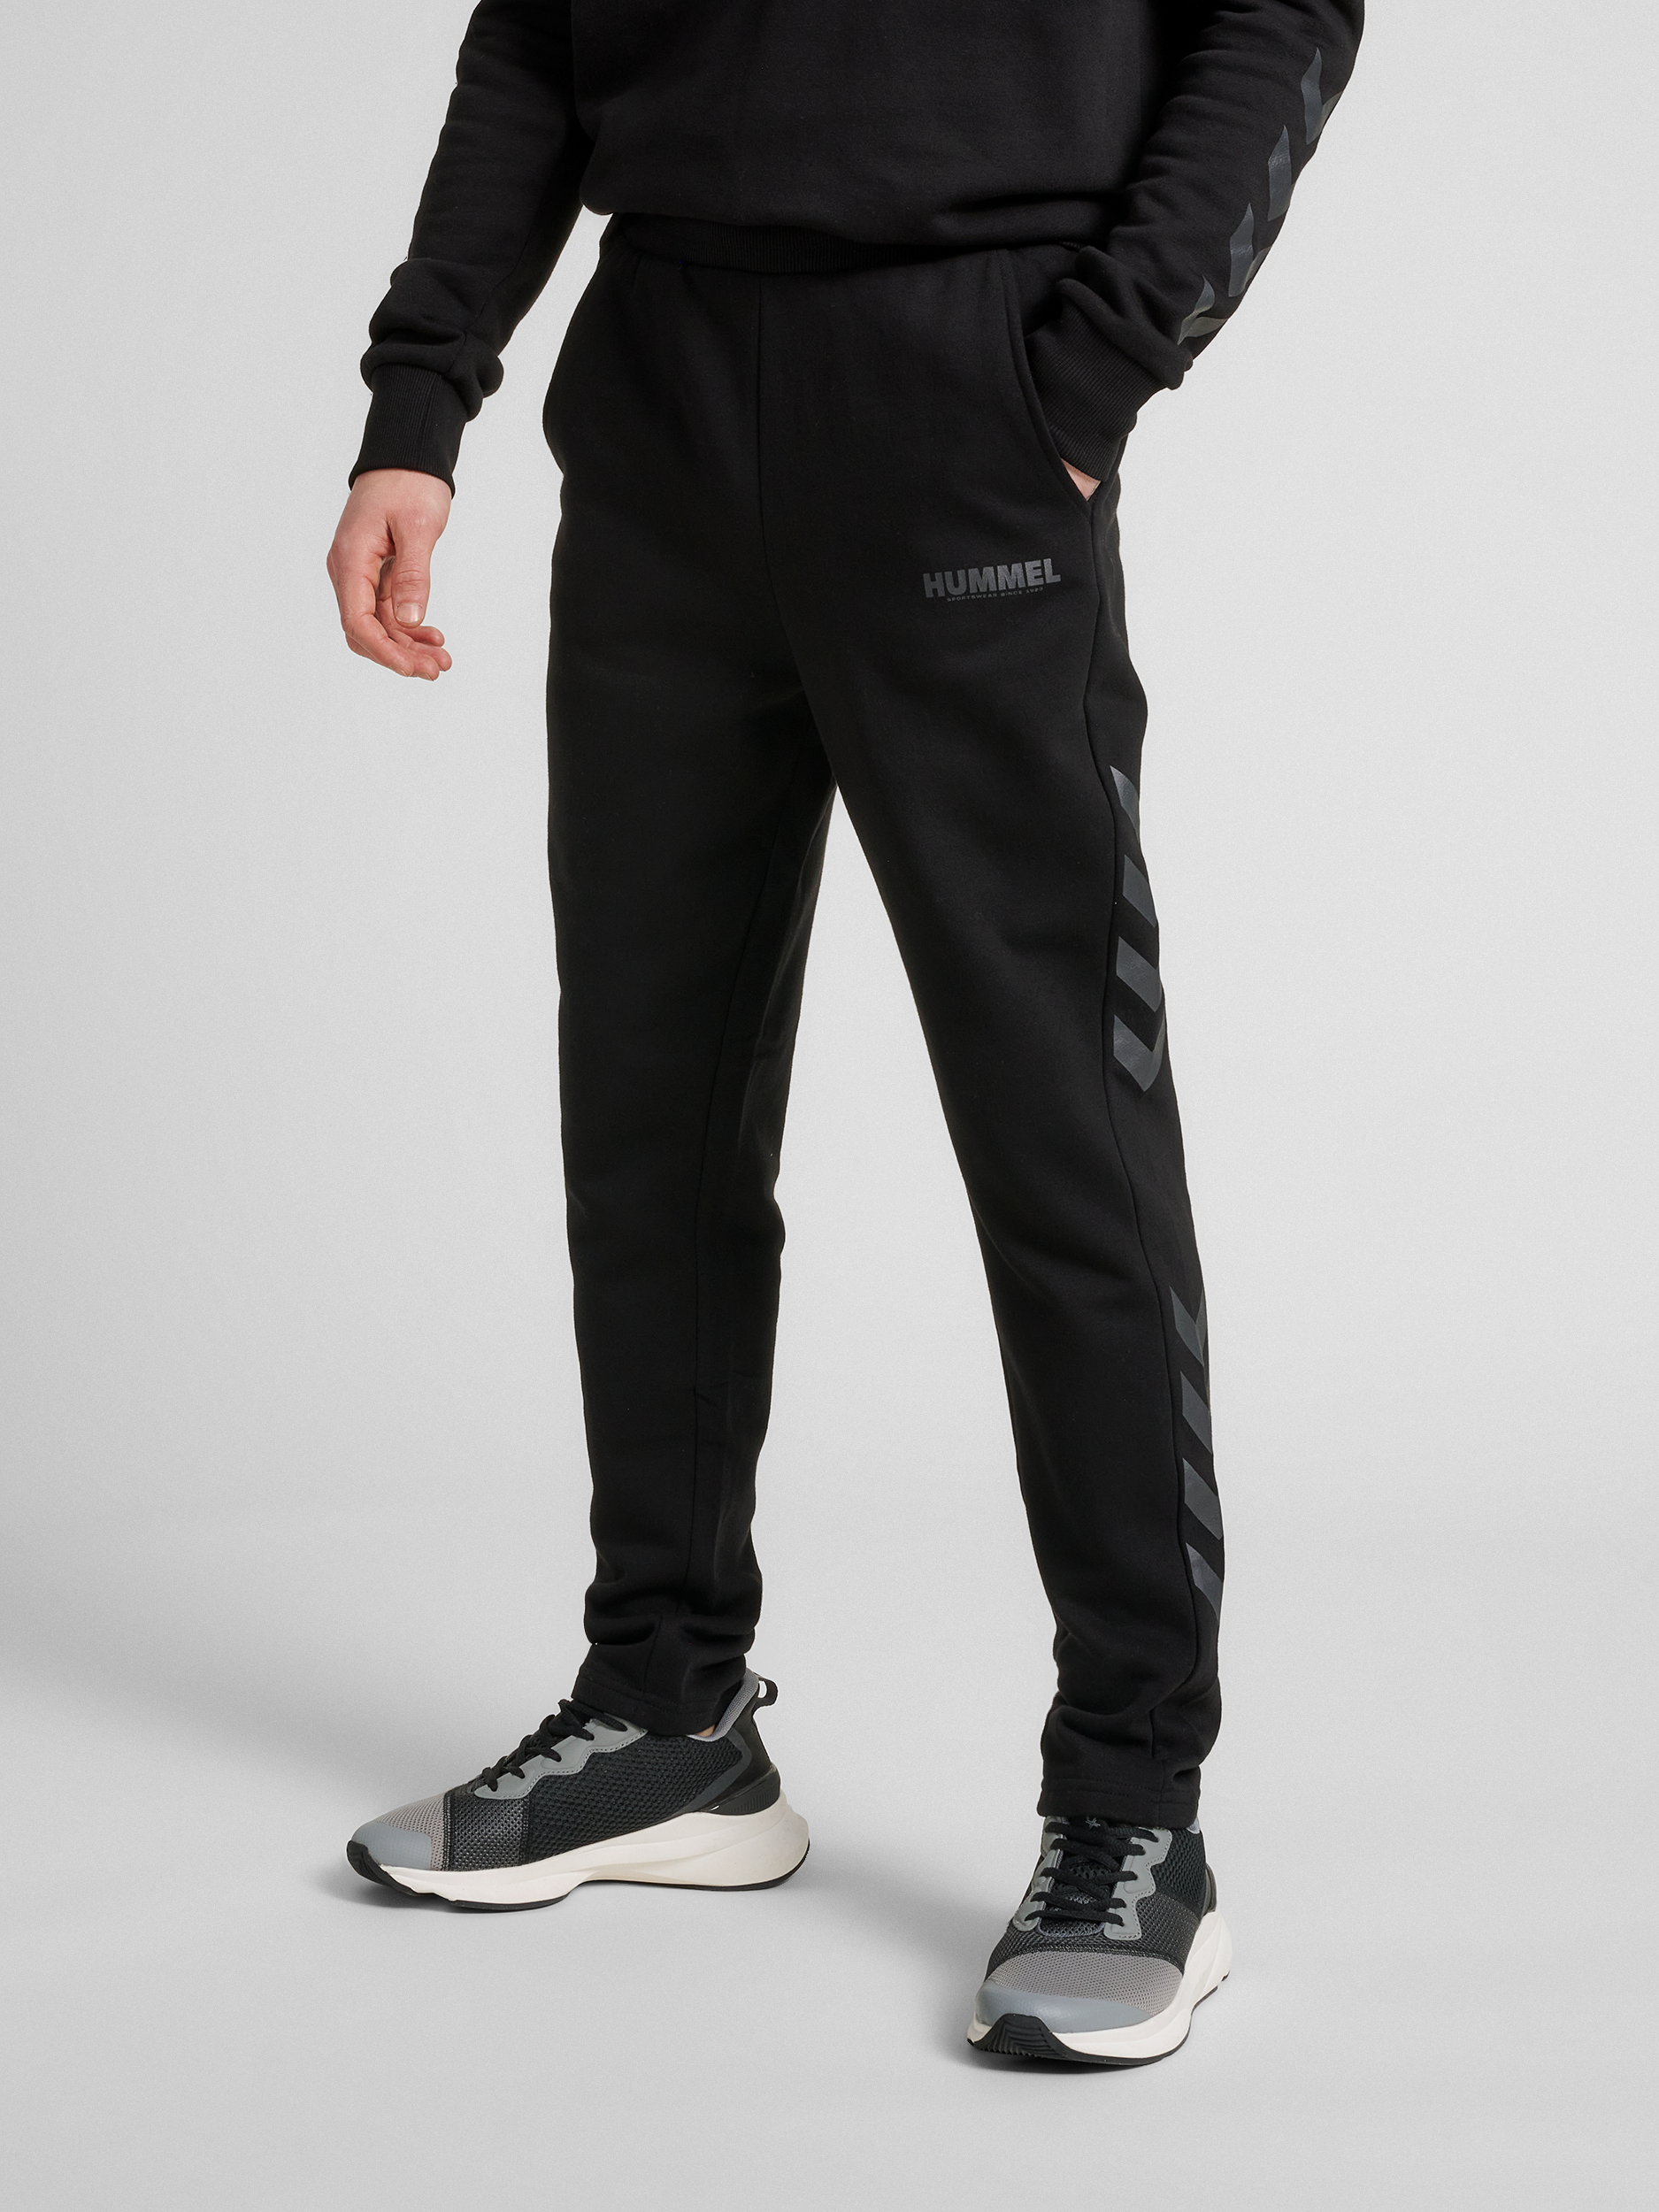 TAPERED – hmlLEGACY PANTS